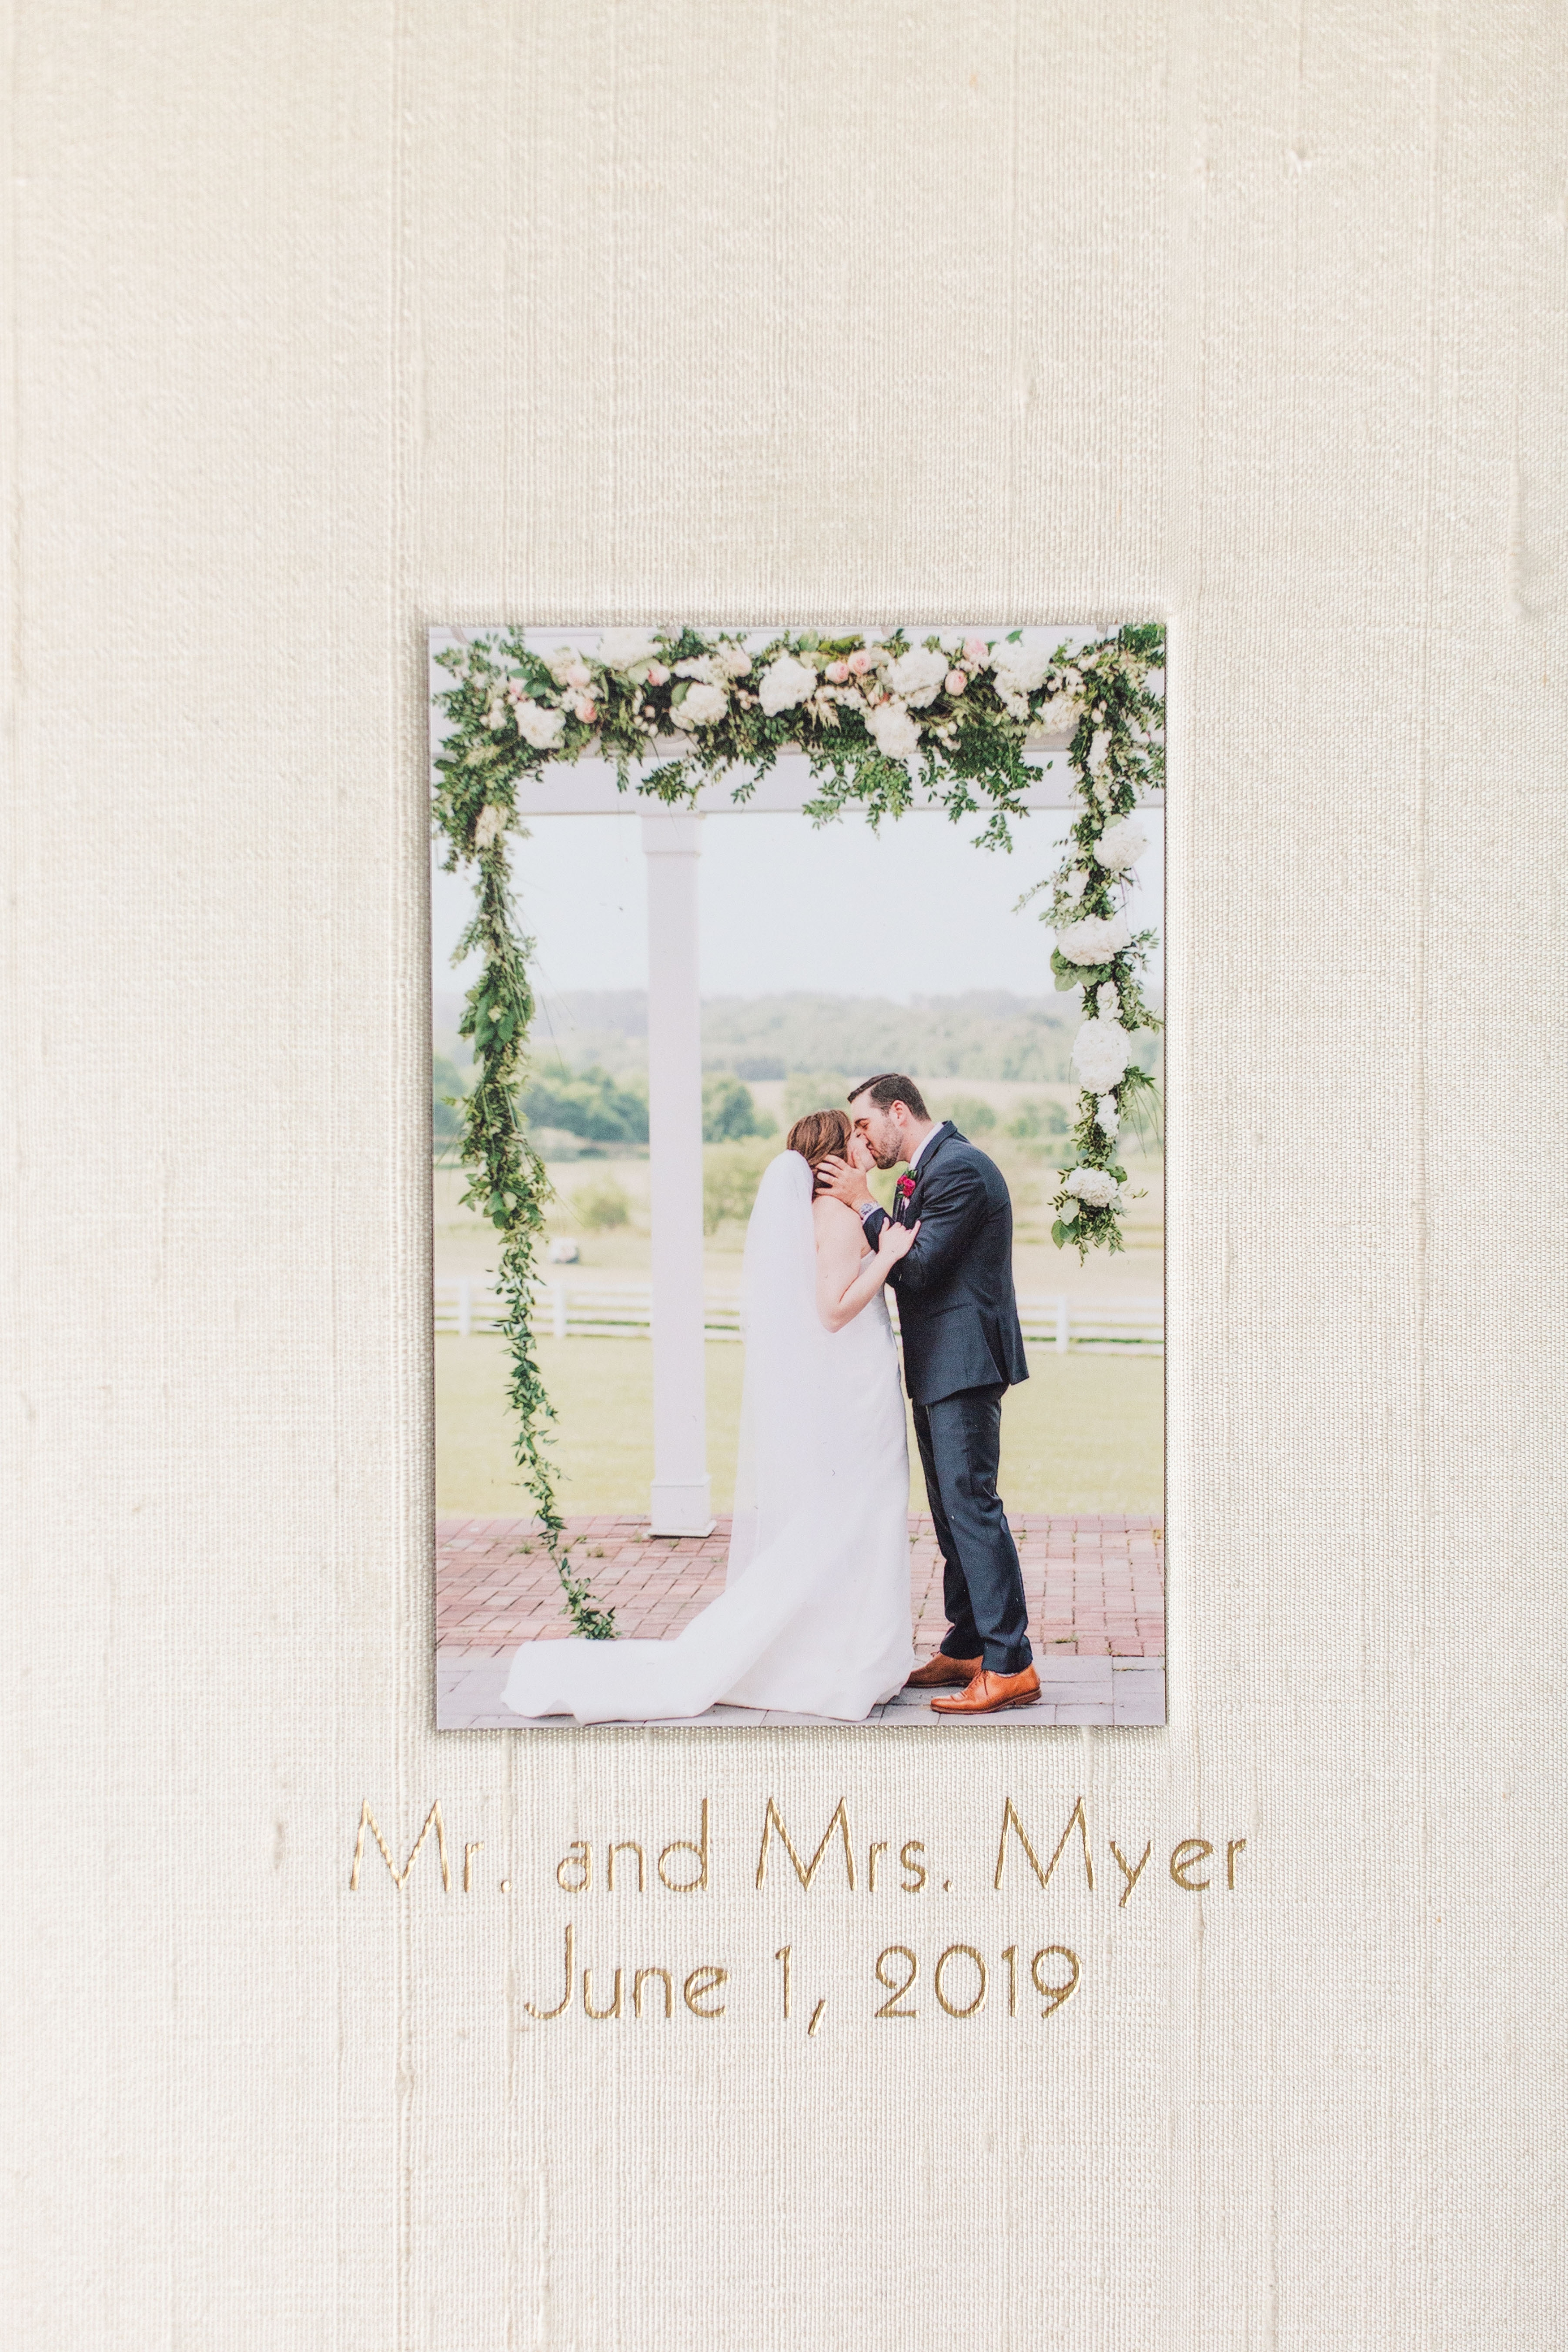 This elegant silk wedding album makes for the perfect family heirloom after the big day.